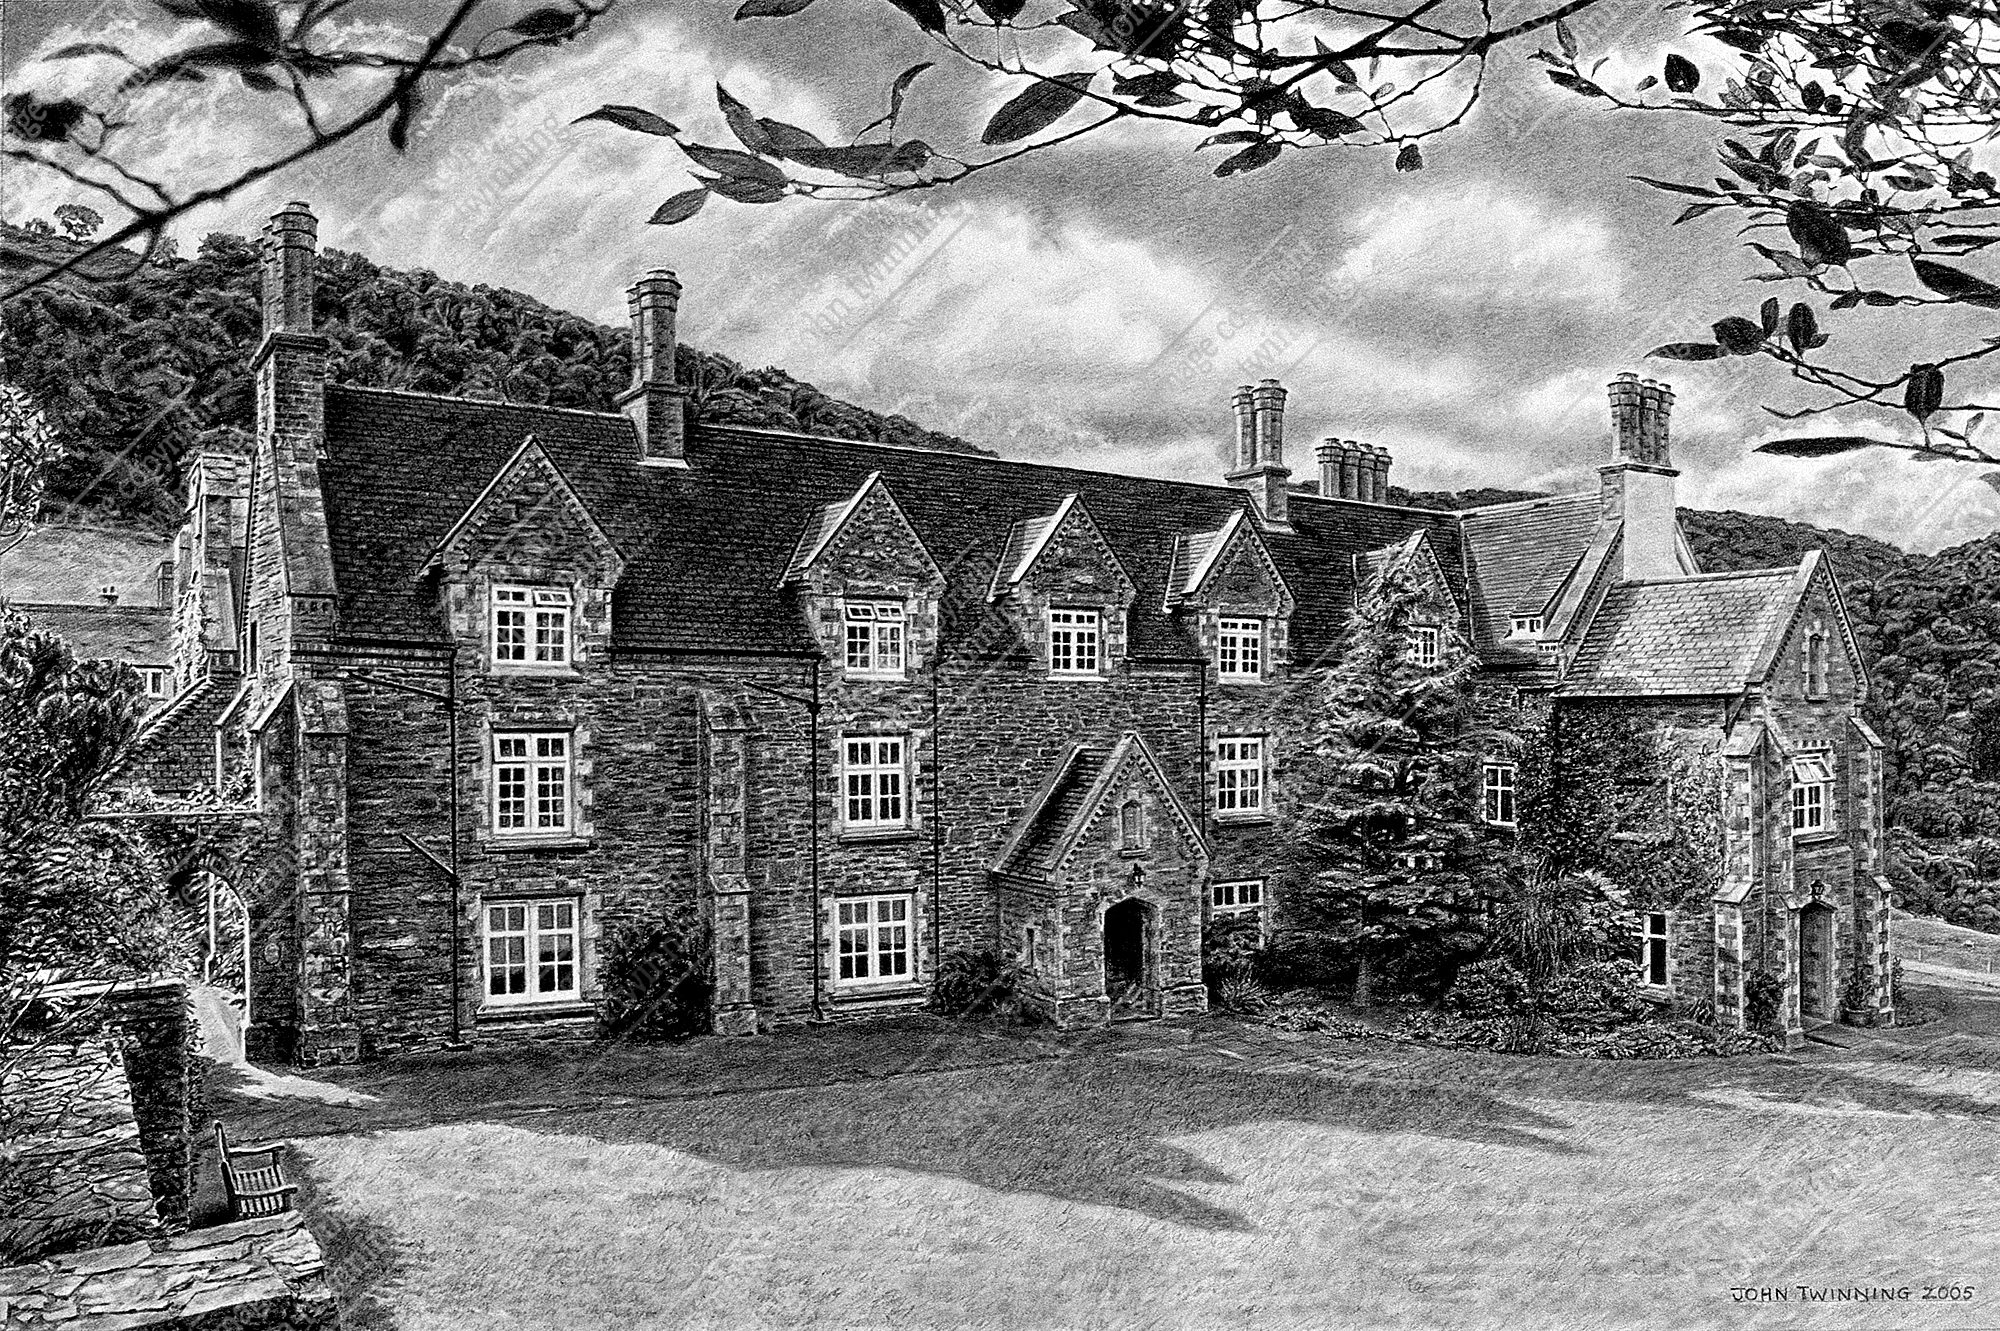 'Lee Abbey house from the north lawn' - art print from a pencil drawing of this north devon based christian retreat centre